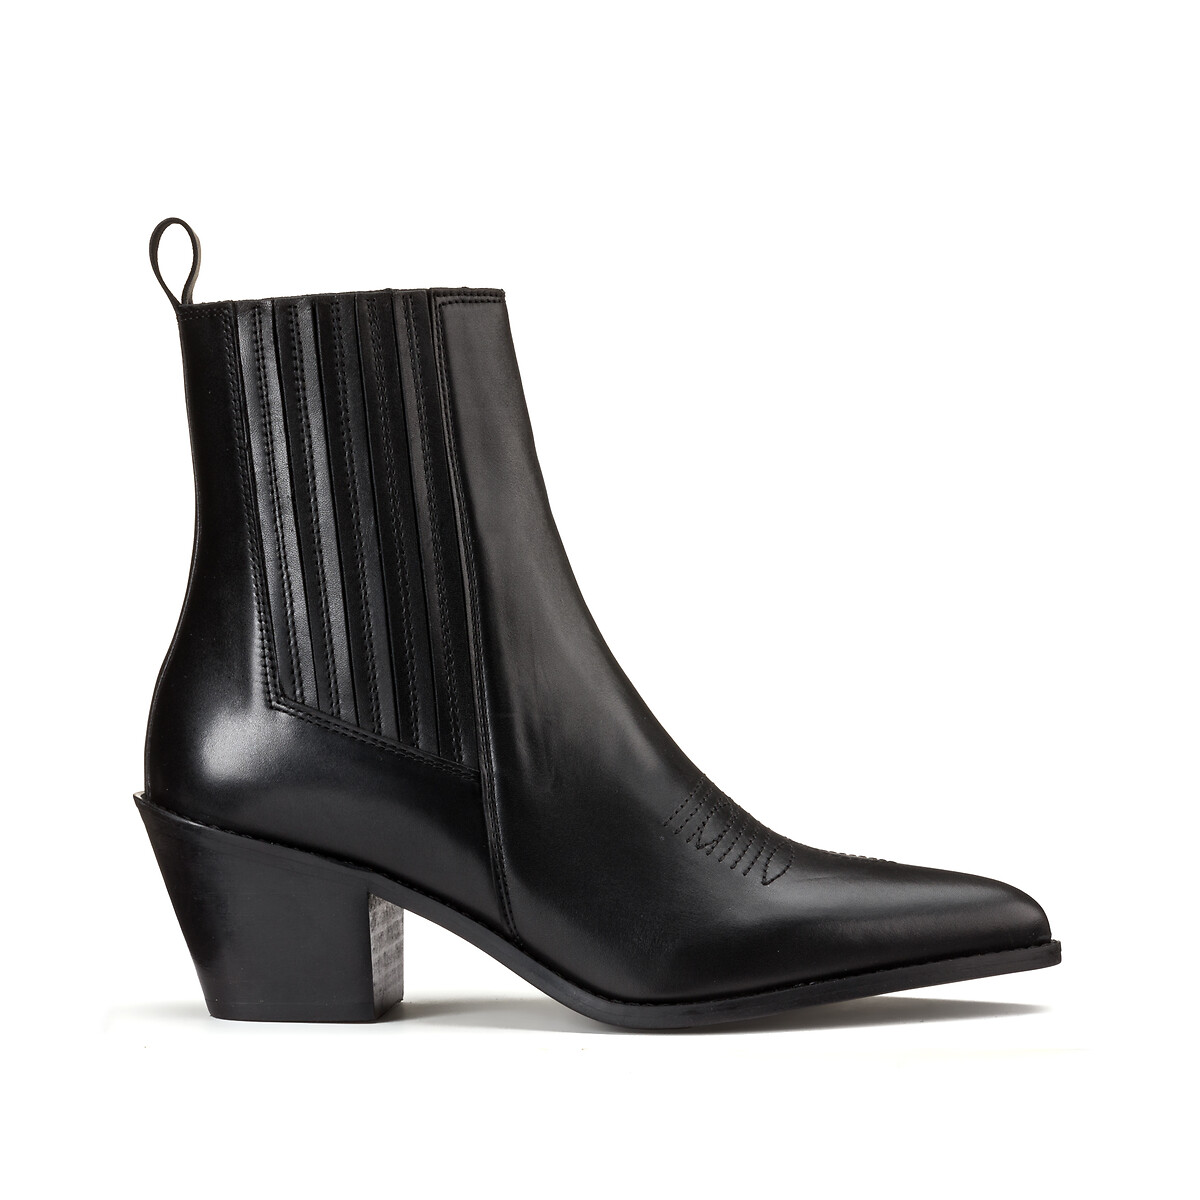 Les signatures - leather cowboy ankle boots, made in europe, black, La ...